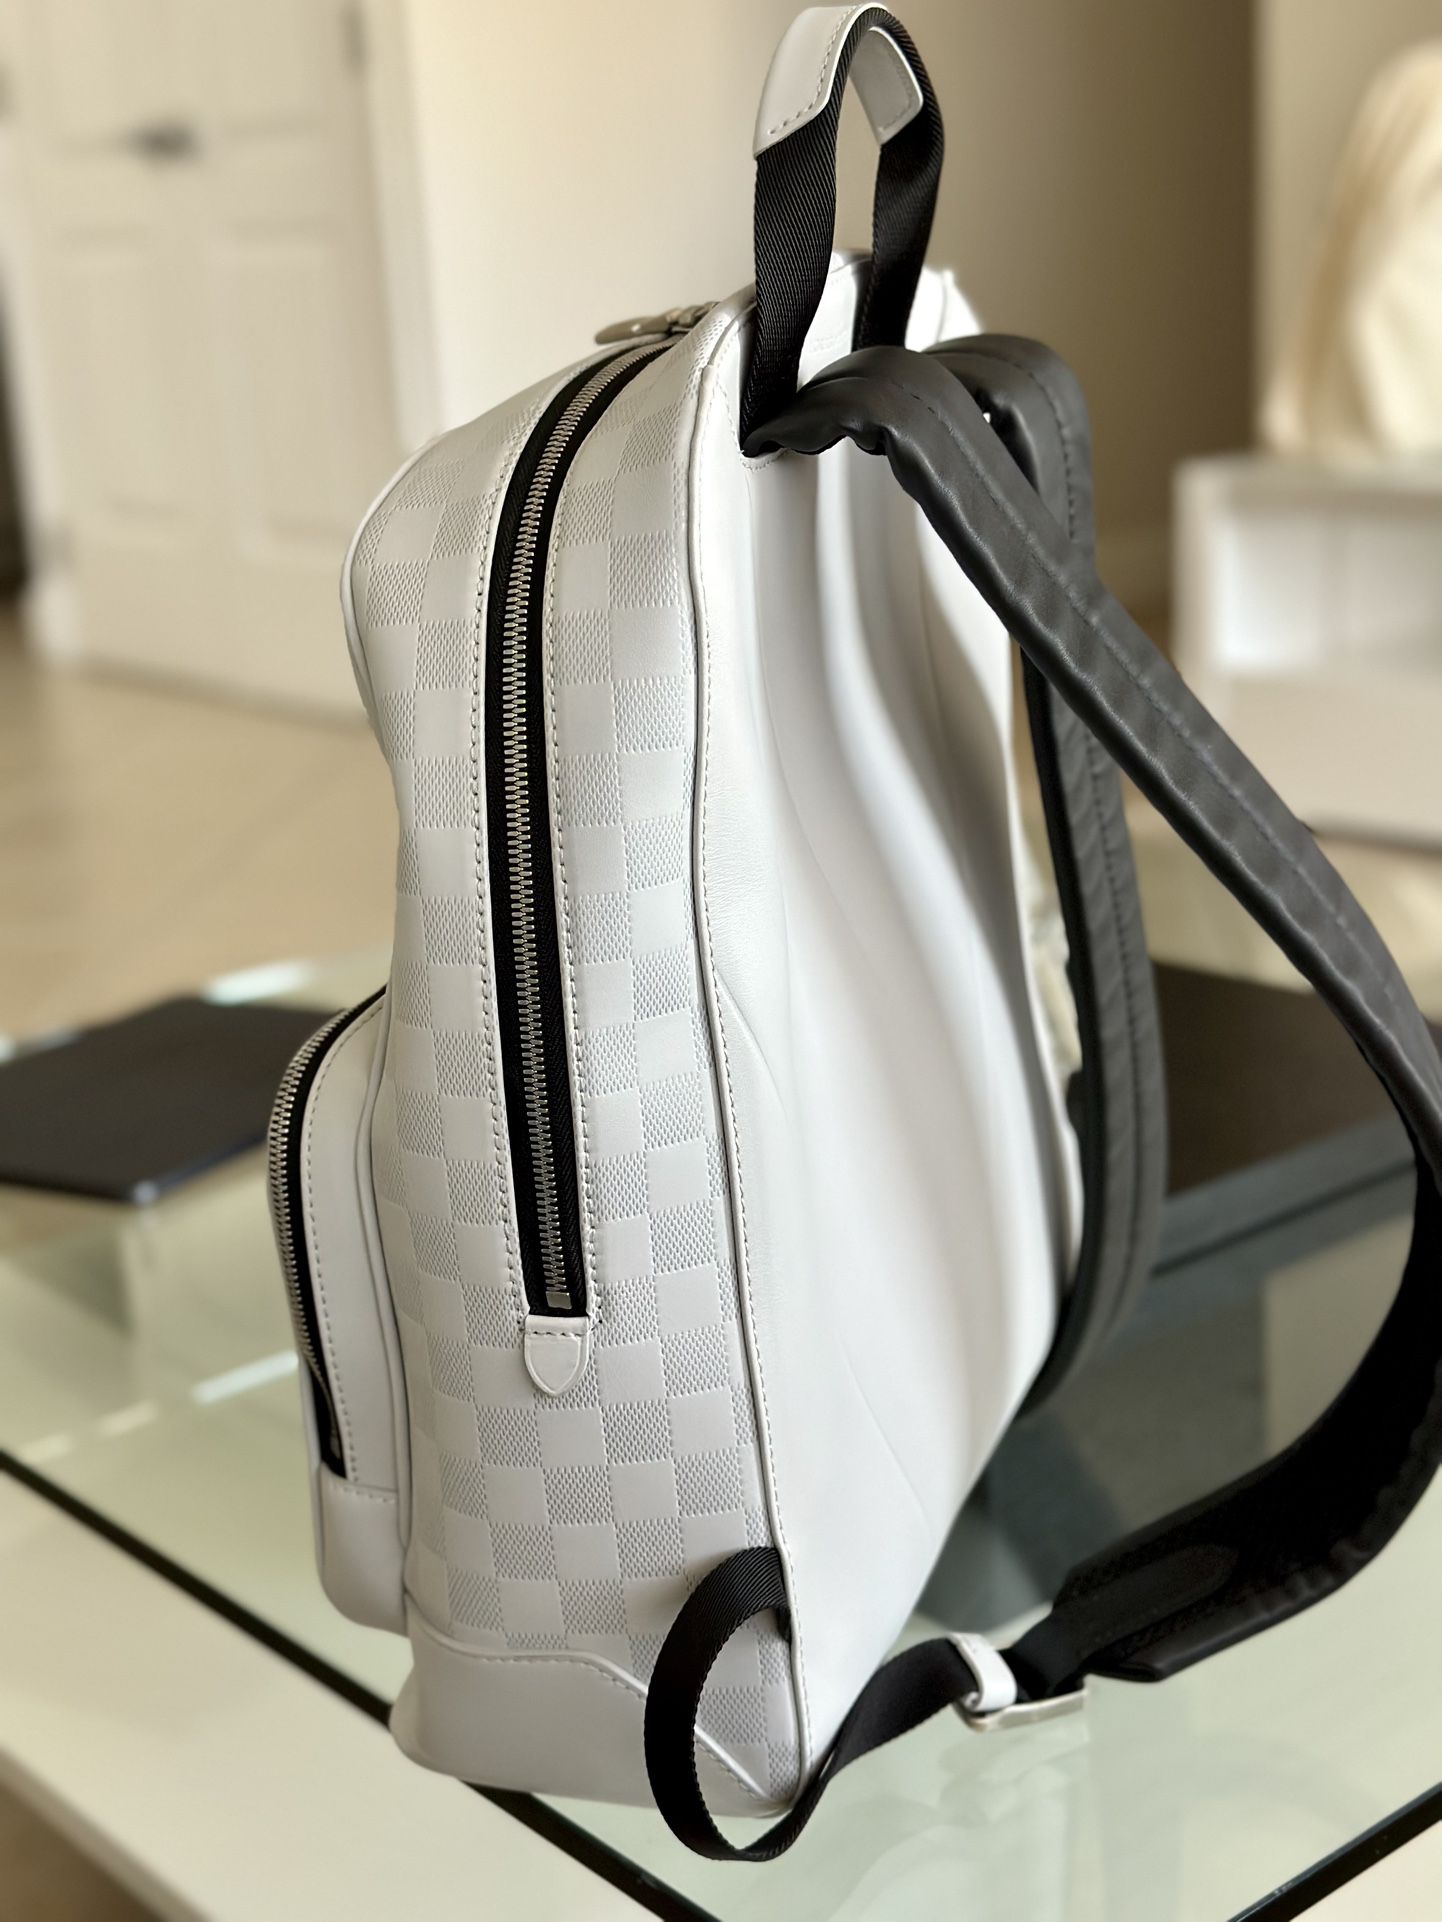 LOUIS VUITTON BACKPACK for Sale in Halndle Bch, FL - OfferUp